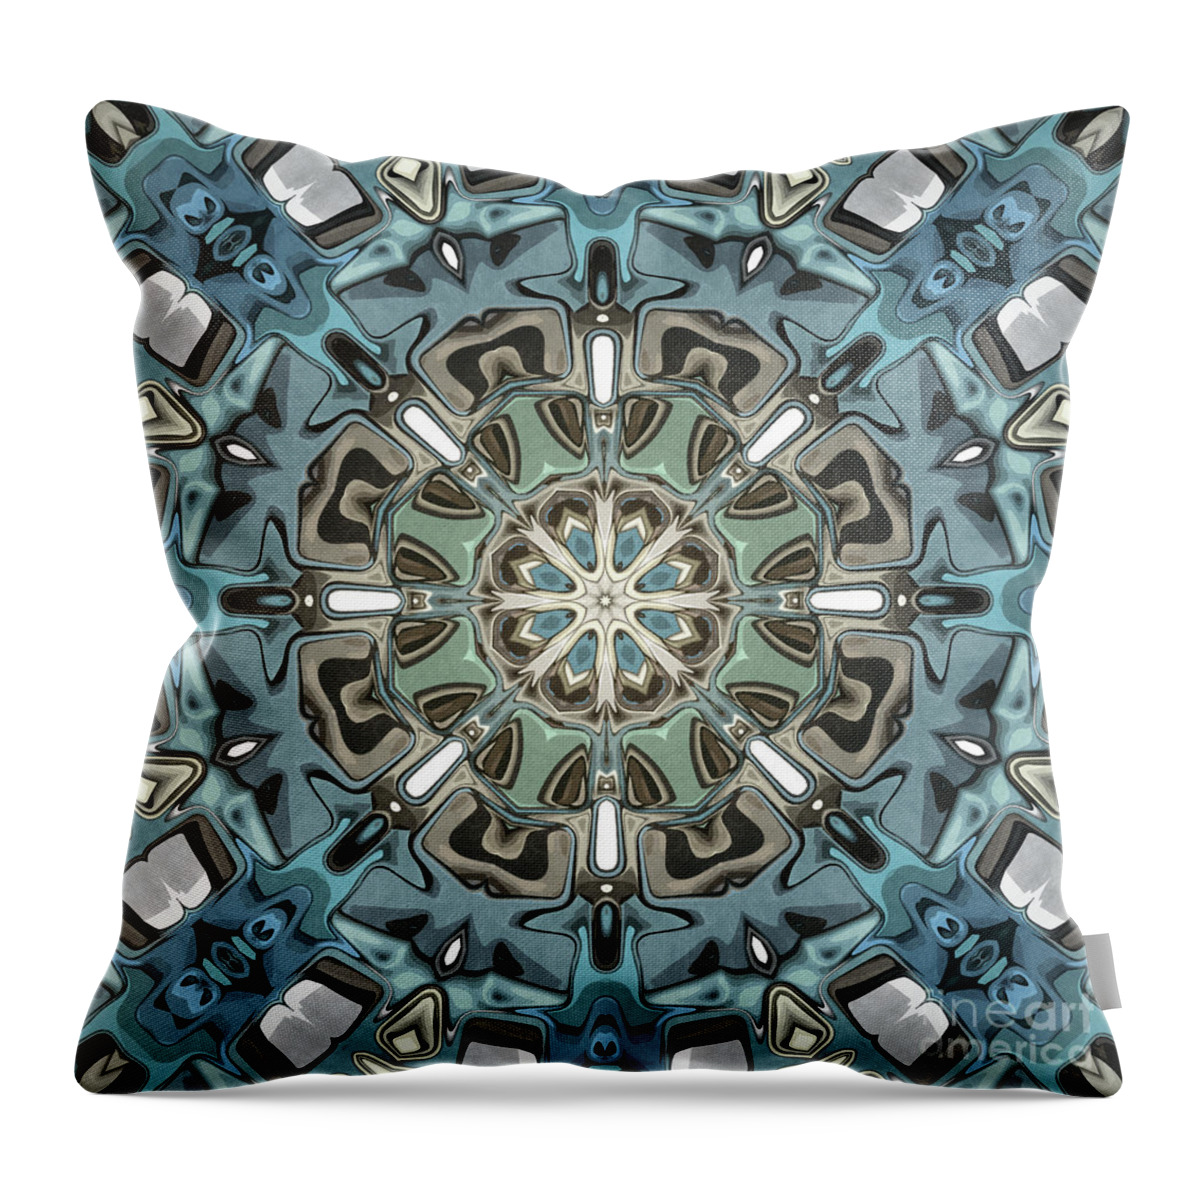 Grunge Throw Pillow featuring the digital art Turquoise Pattern by Phil Perkins